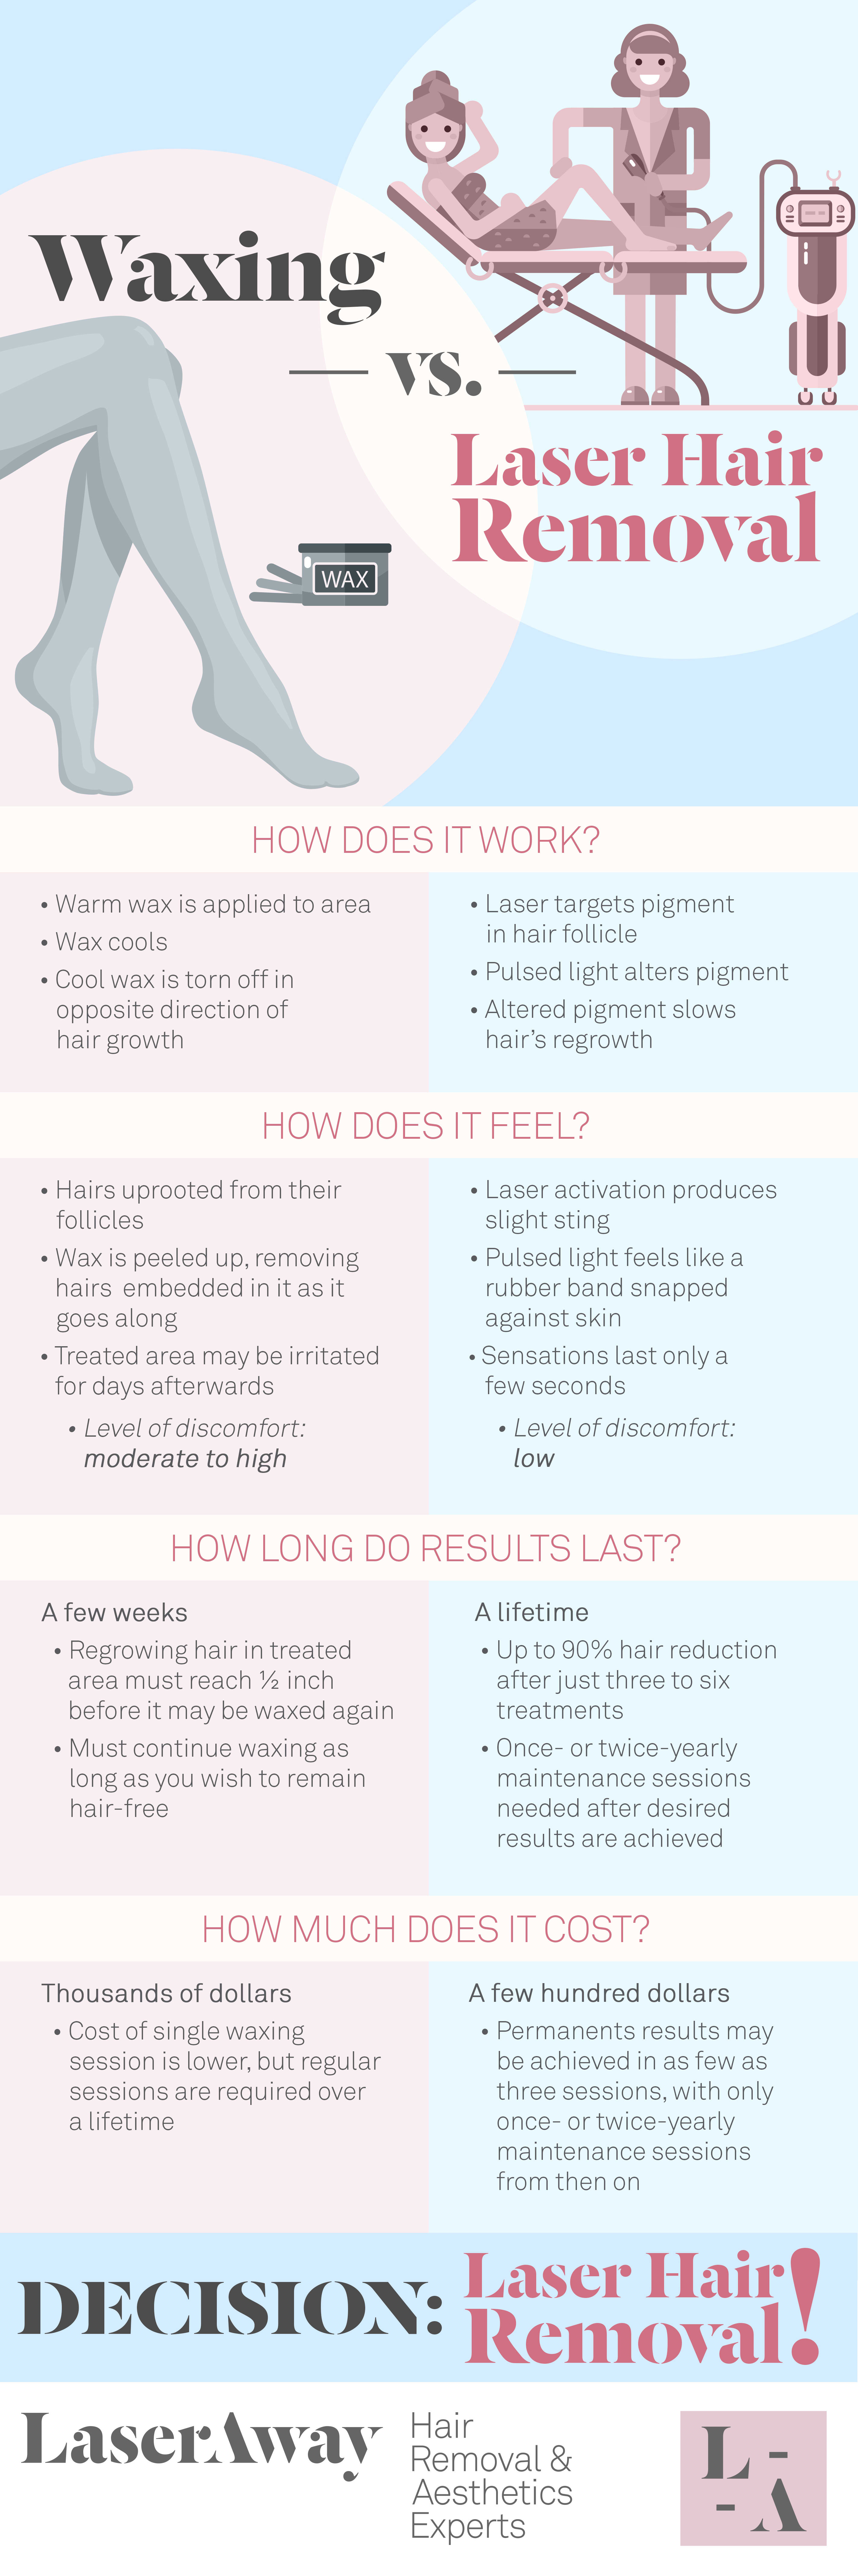 Laser away infographic image for Waxing vs. Laser Hair Removal